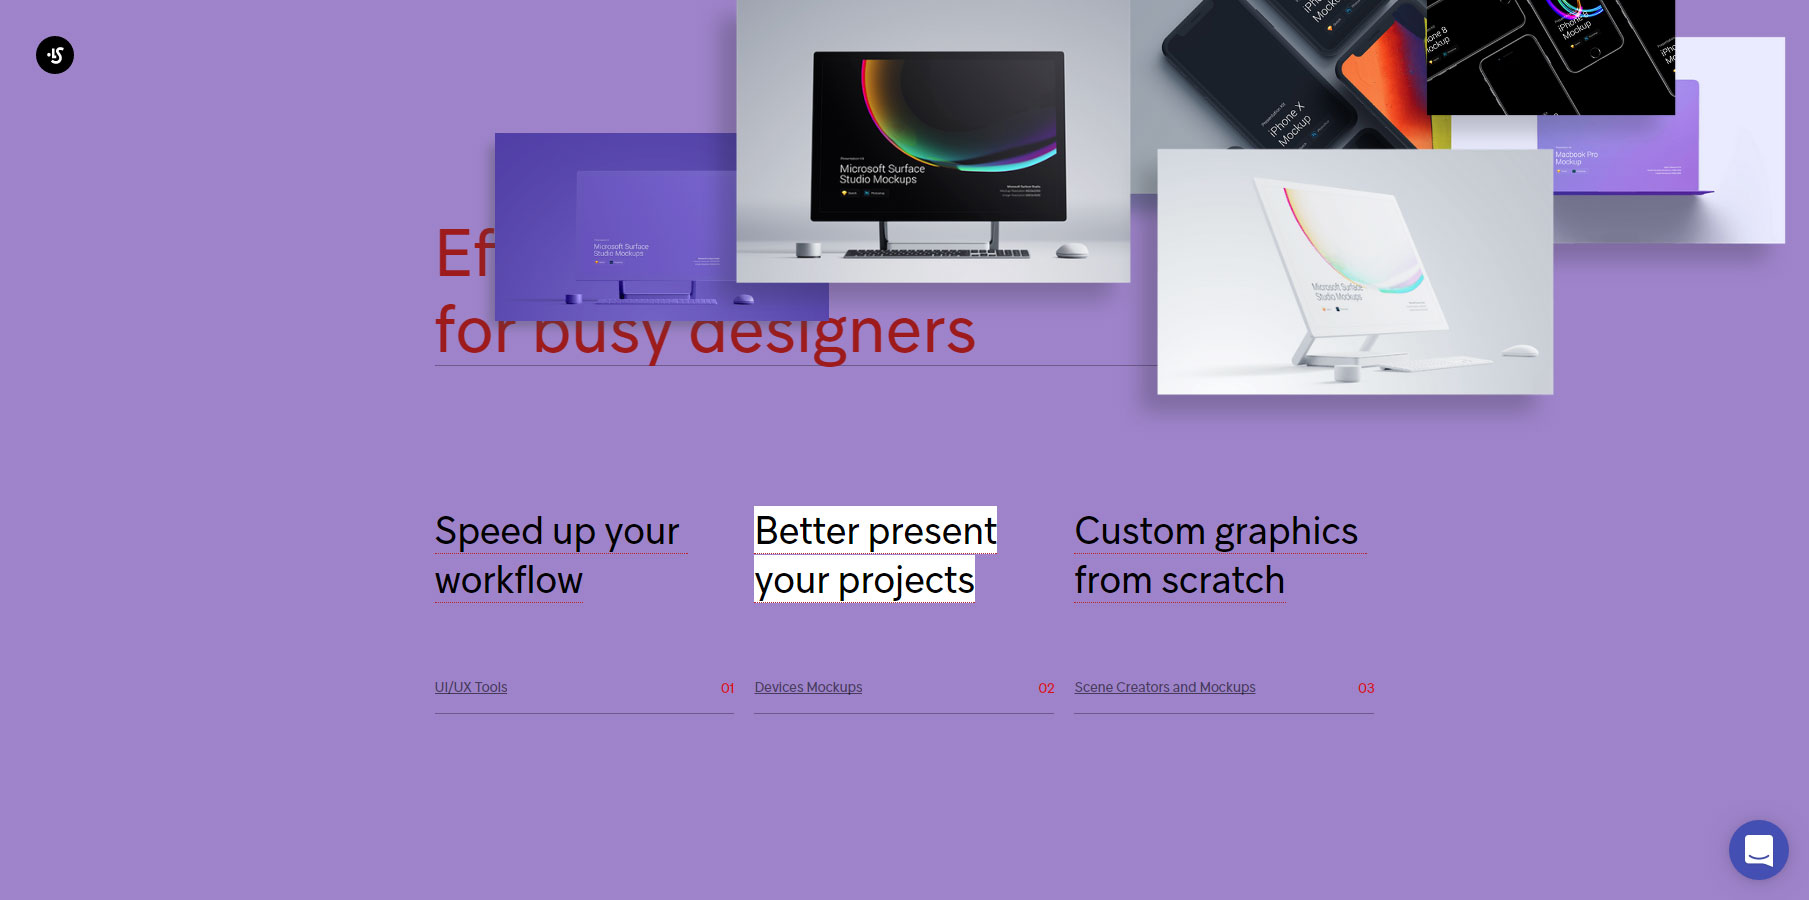 Effective tools for busy designers - Website of the Day